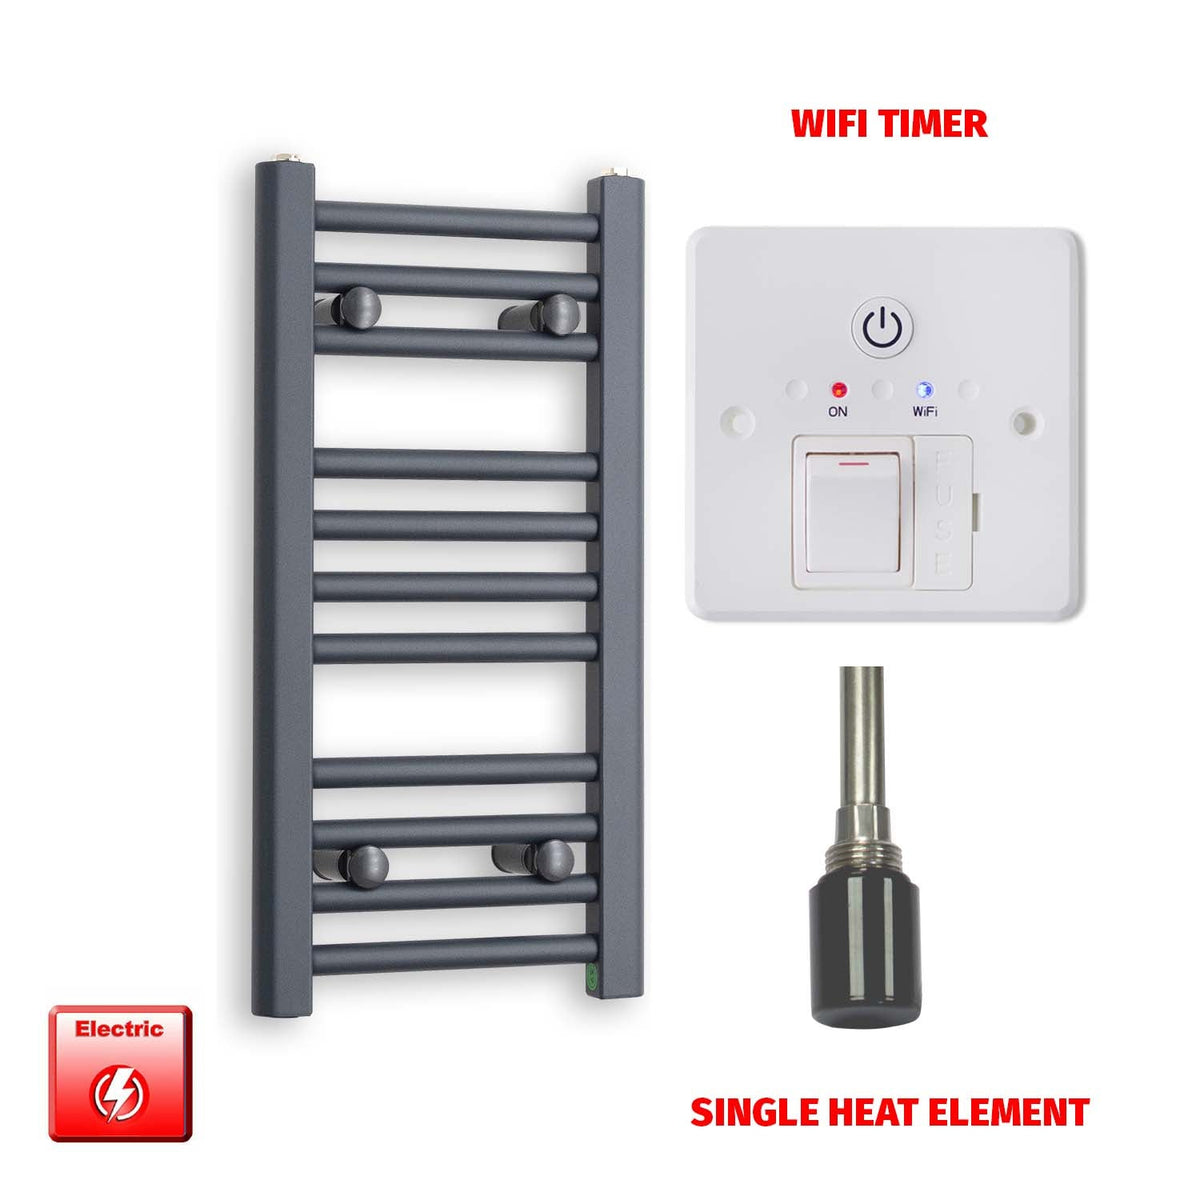 600 x 300 Flat Anthracite Pre-Filled Electric Heated Towel Radiator HTR Single heat element Wifi timer